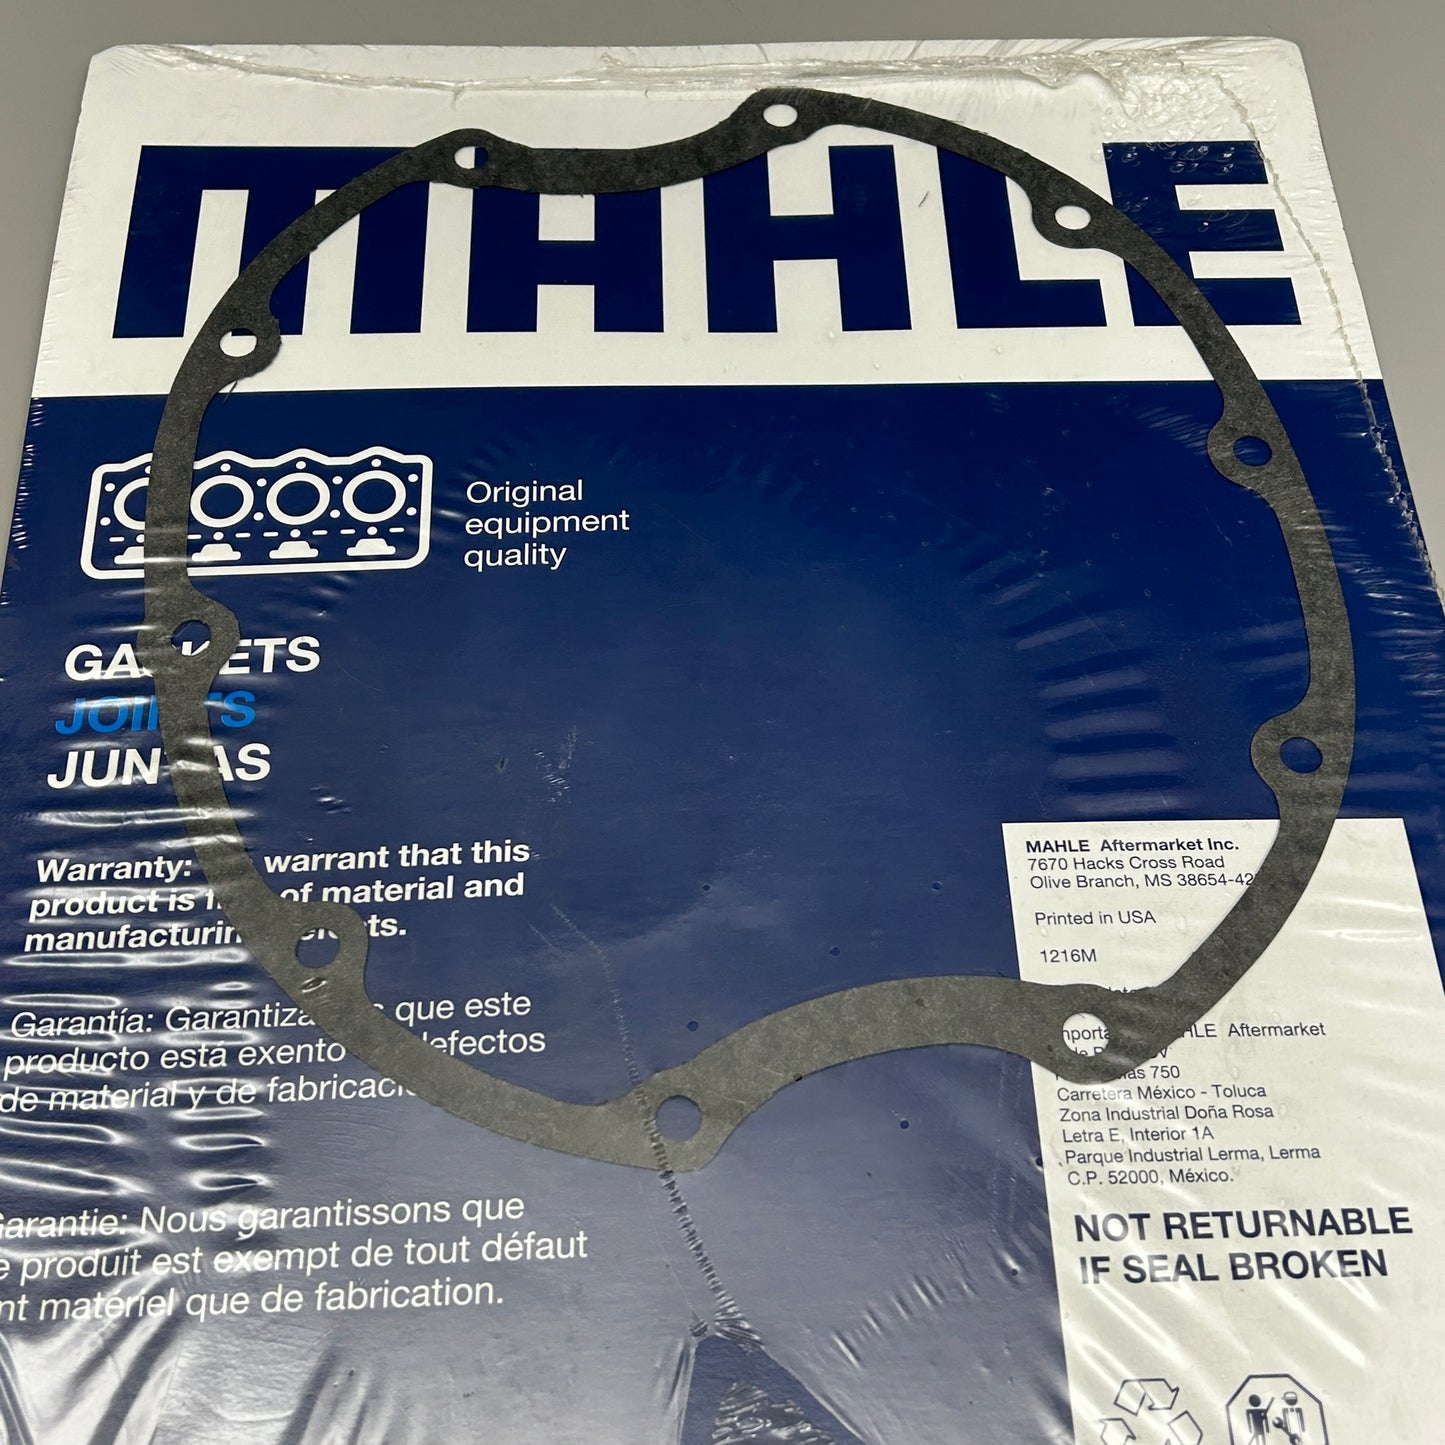 MAHLE Axle Housing Cover Gasket General Motors P27820 (New, Damaged Packaging)